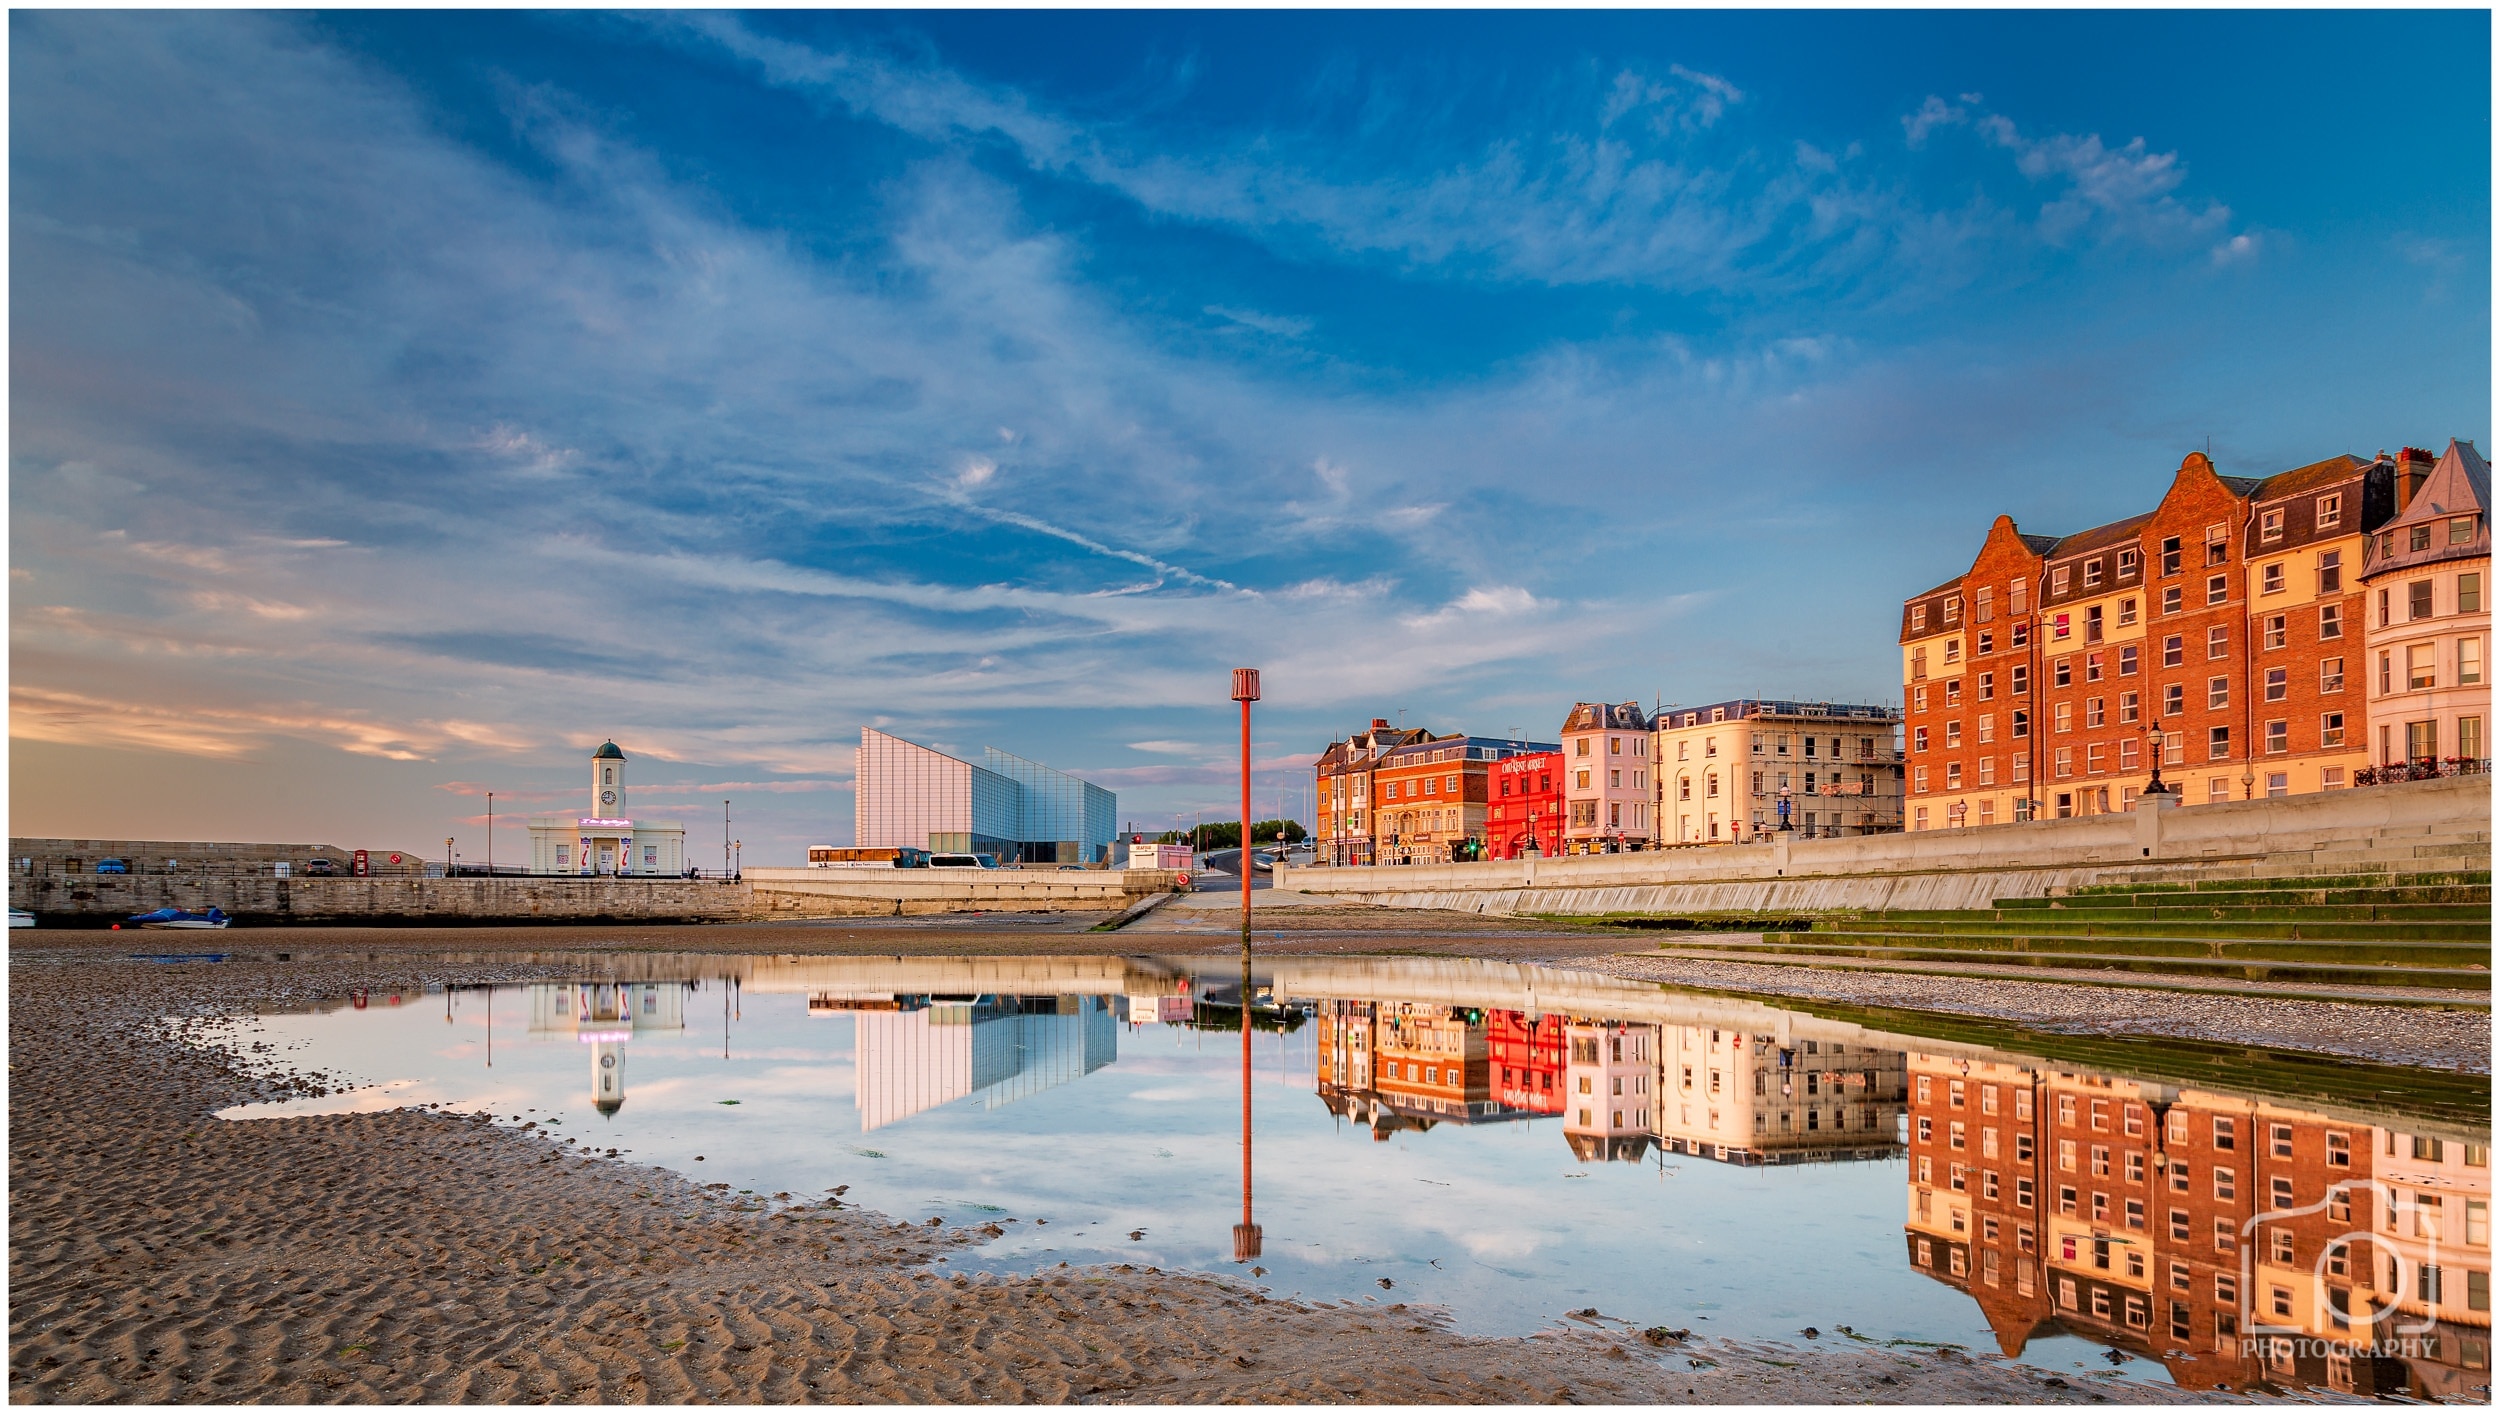 The Turner Gallery reflected in the pool left by the receding tide. The Kings Stairs is a great place to sit and watch the #sunset #margate #kent #thanet #reflections #travel #tourism #travel #staycation
I have really been struggling with a slump in my photography, i had no enthusiasm to get out and found it a real struggle. Tonight i decided i had to get out and shoot, i gathered all my gear, jumped in the car and headed out to capture Sunset at Margate, Kent.

I parked a few streets away and walked down to the seafront and thus avoided any car parking charges 

https://www.youtube.com/watch?v=9jWmO8X8Yx8